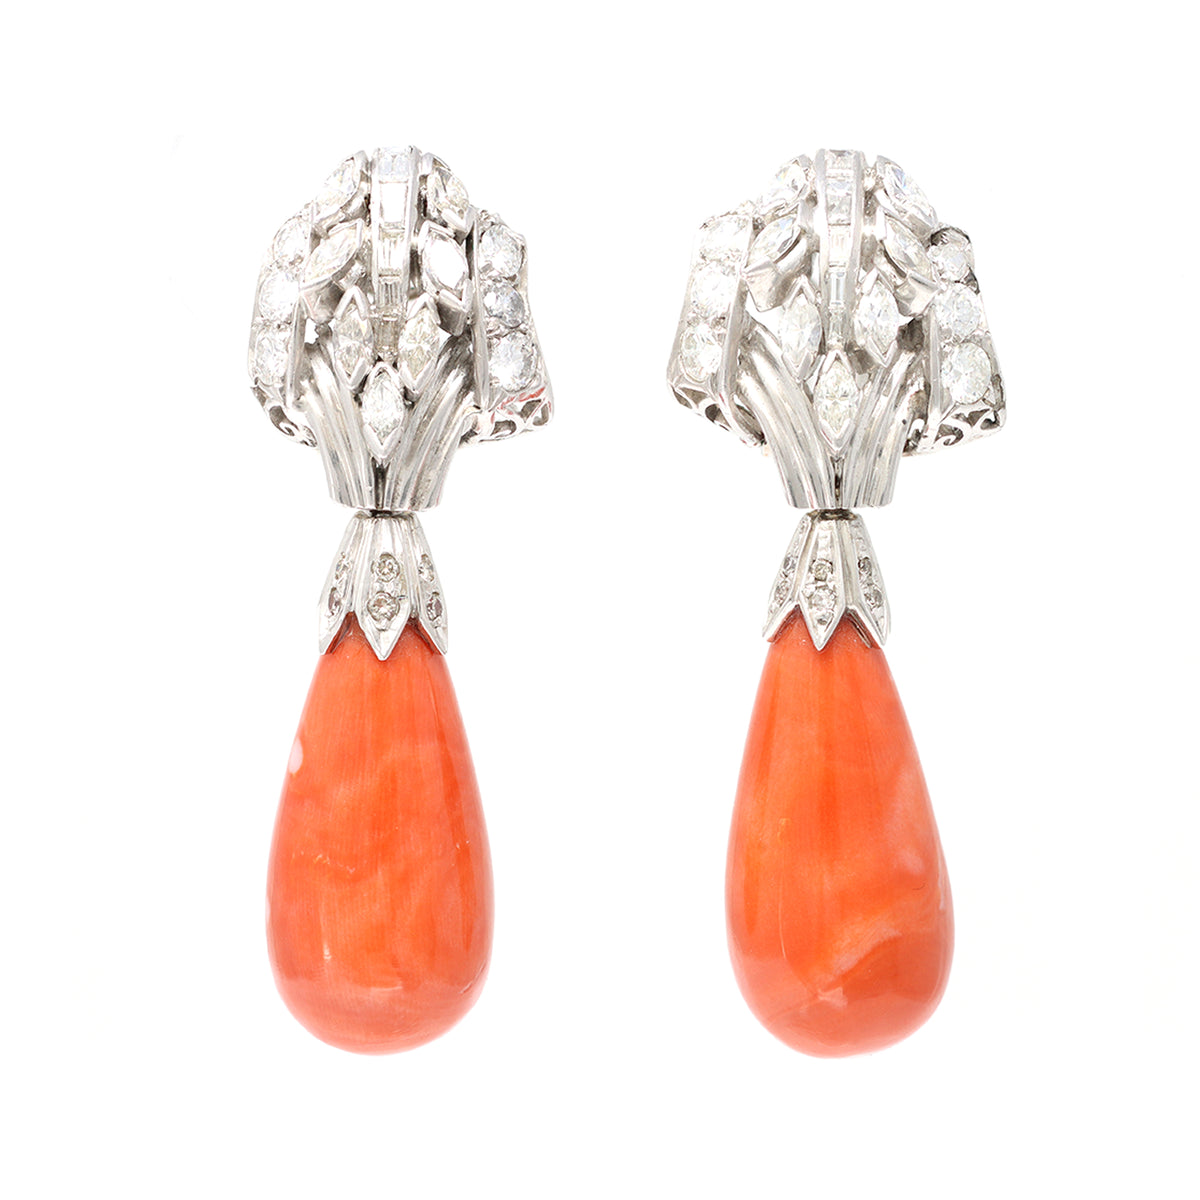 Coral Drop and Diamond Earrings Circa 1950 in Platinum front view